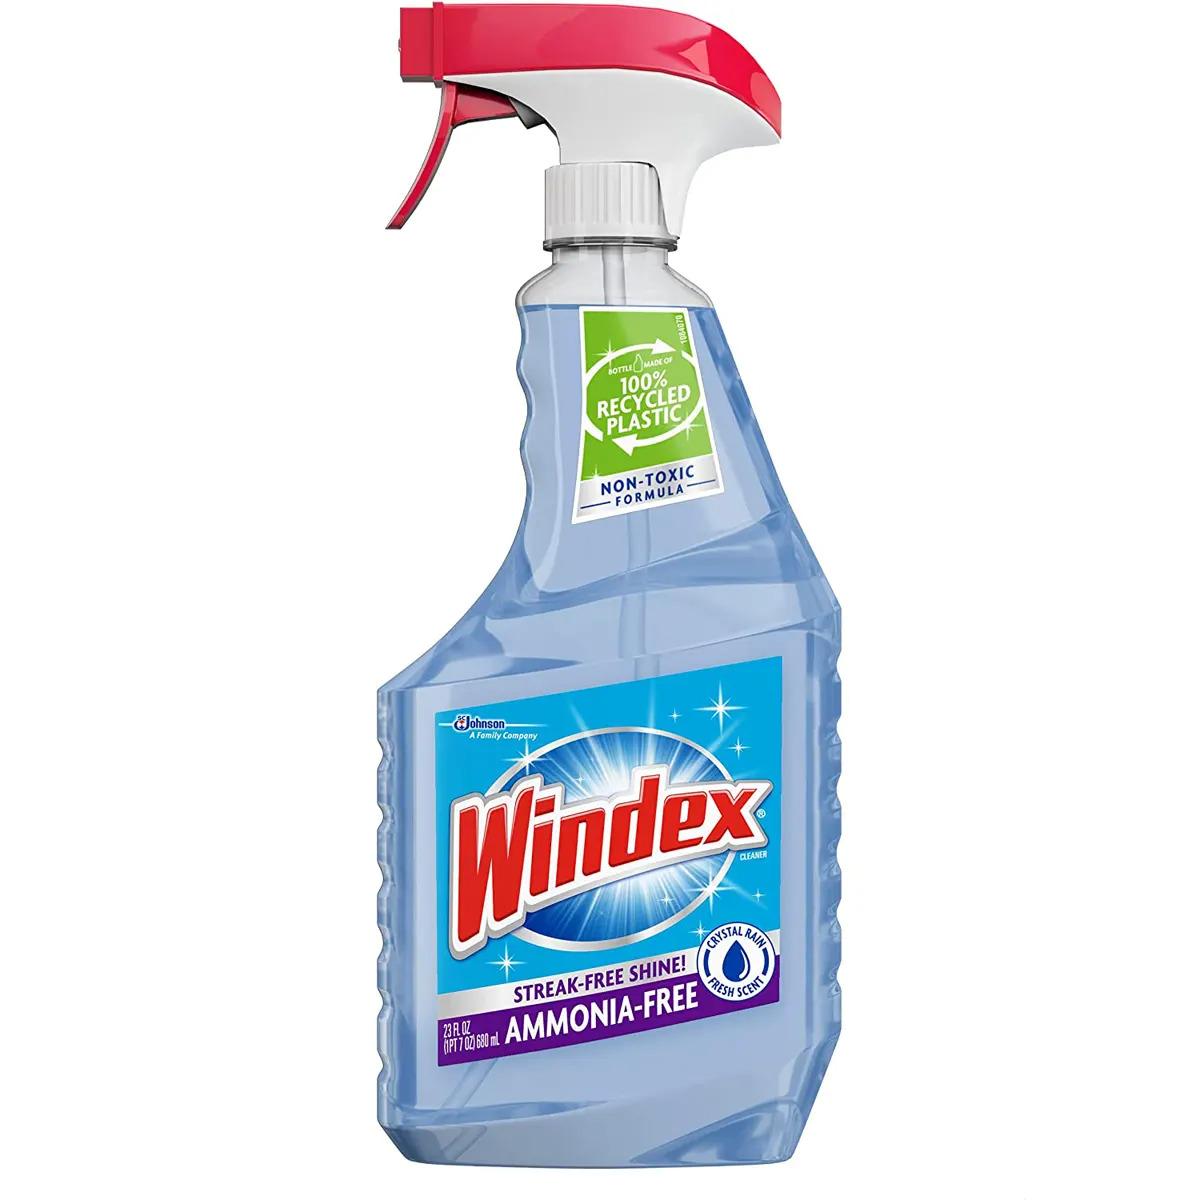 Windex Crystal Rain Glass Cleaner for $2.58